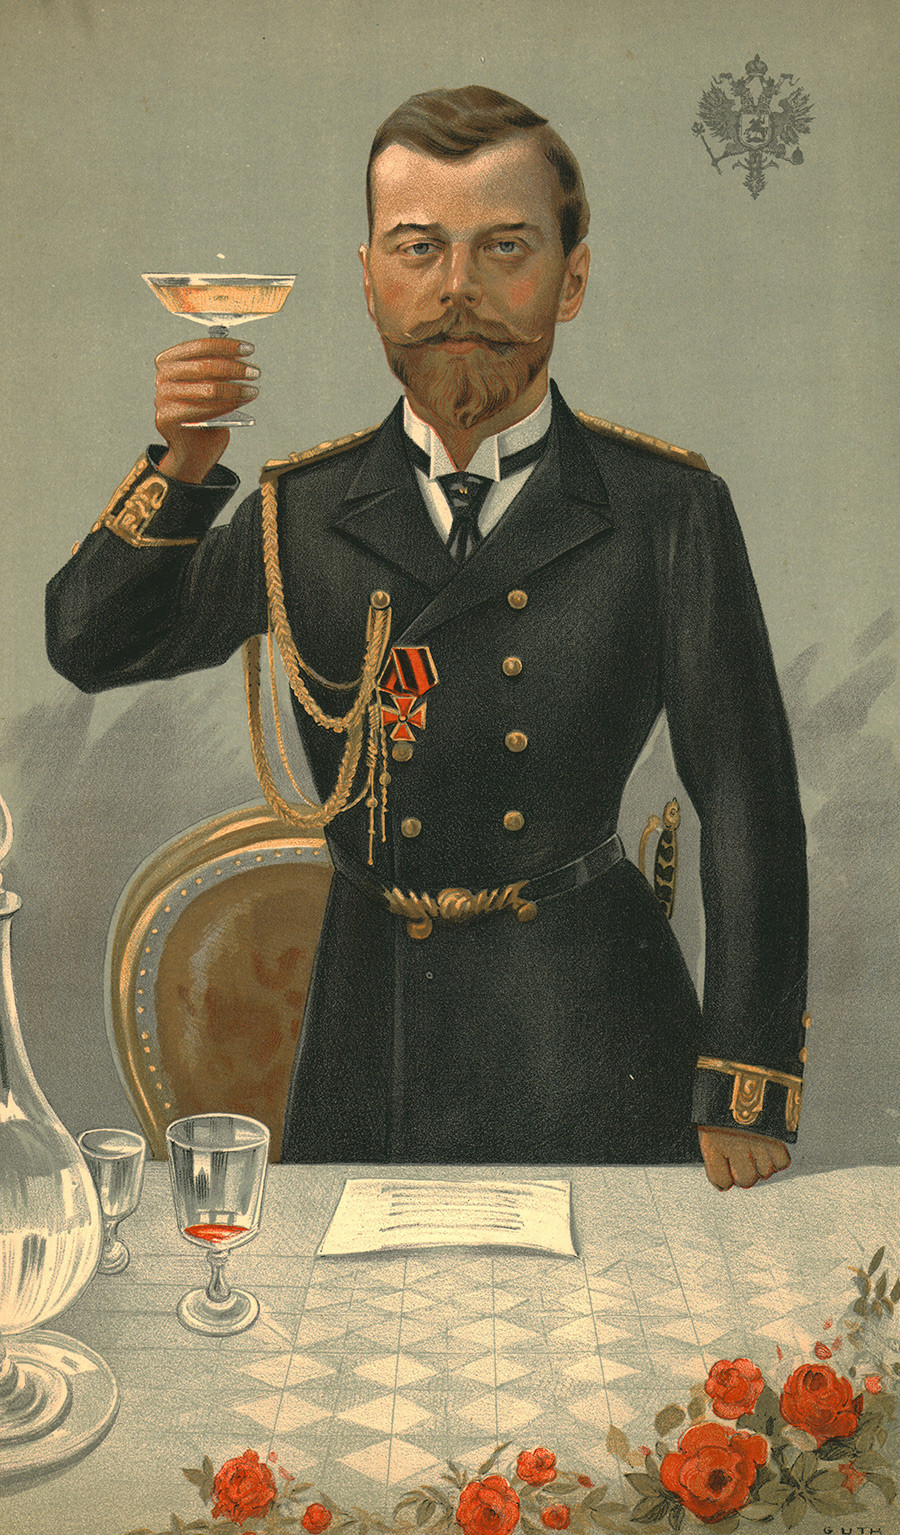 'The Little Father', 1897. Portrait of Tsar Nicholas II of Russia (1868-1918), raising a toast. Published in Vanity Fair, 21 October 1897. Artist Jean Baptiste Guth.